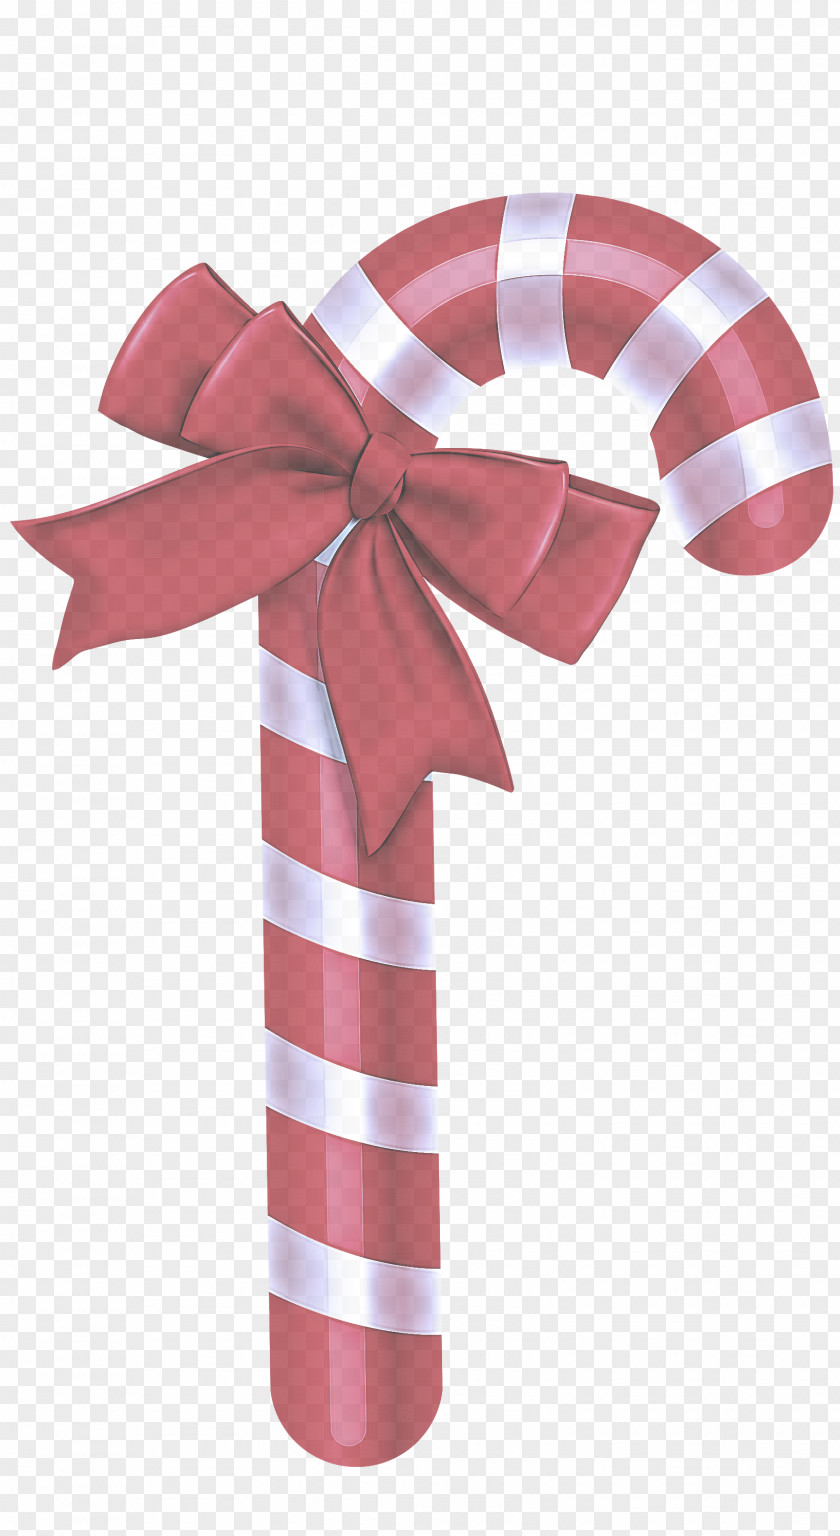 Material Property Candy Cane PNG